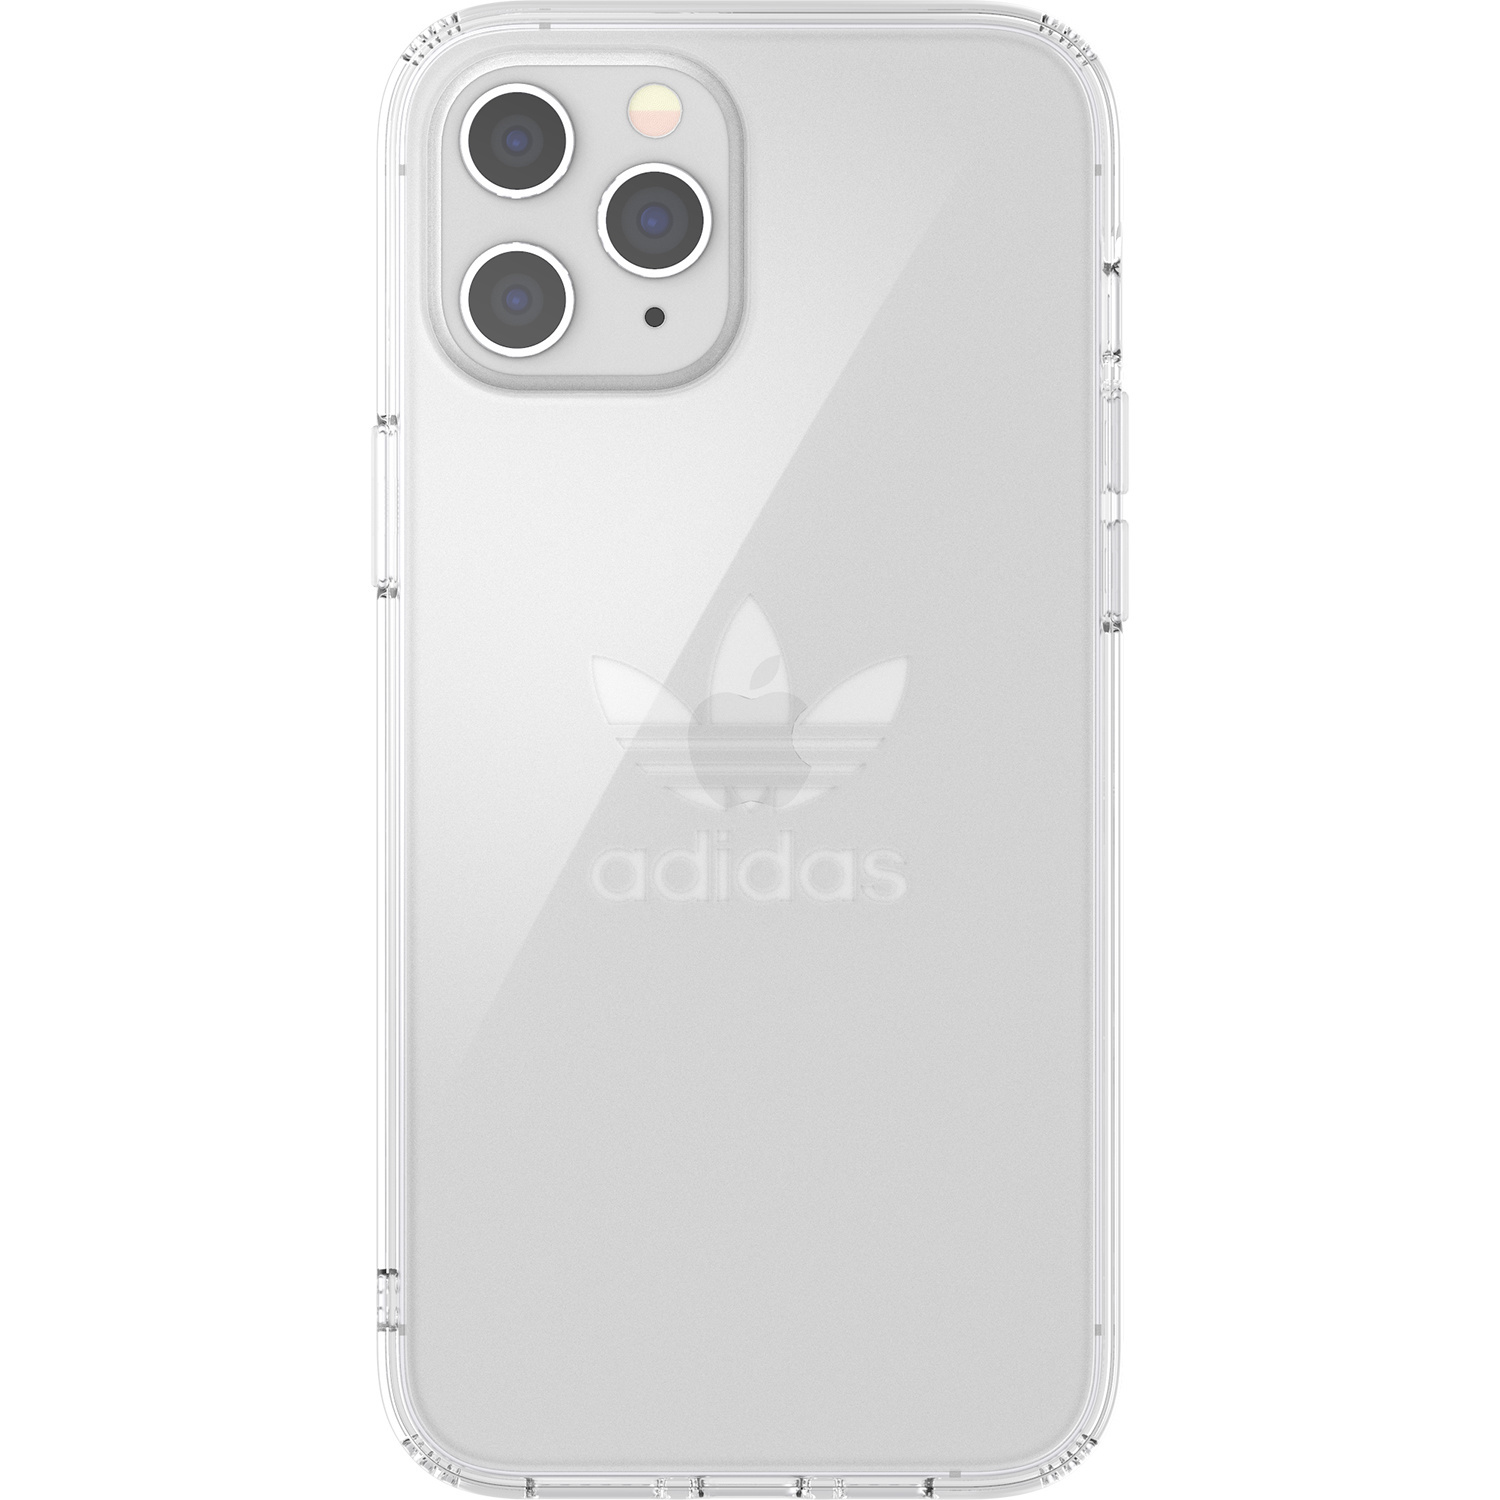 Adidas Clear Backcover voor de iPhone 12 Pro Max - Transparant